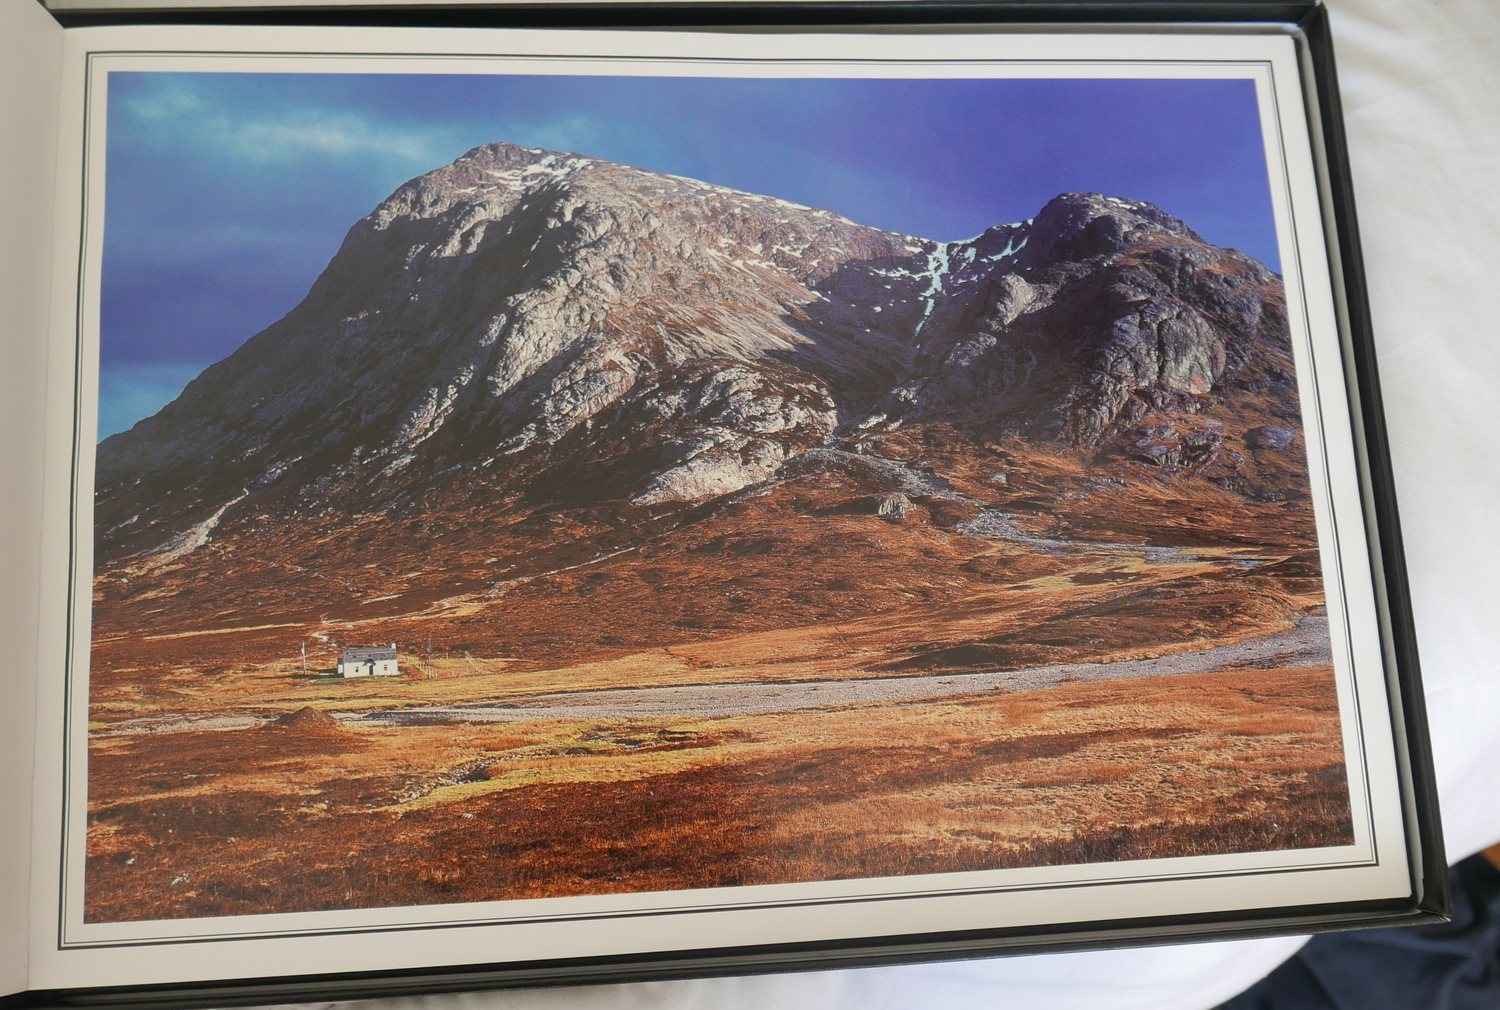 Logica Millenium Images of Scotland Book by Donald Ford - 17" x 12" - Image 3 of 4